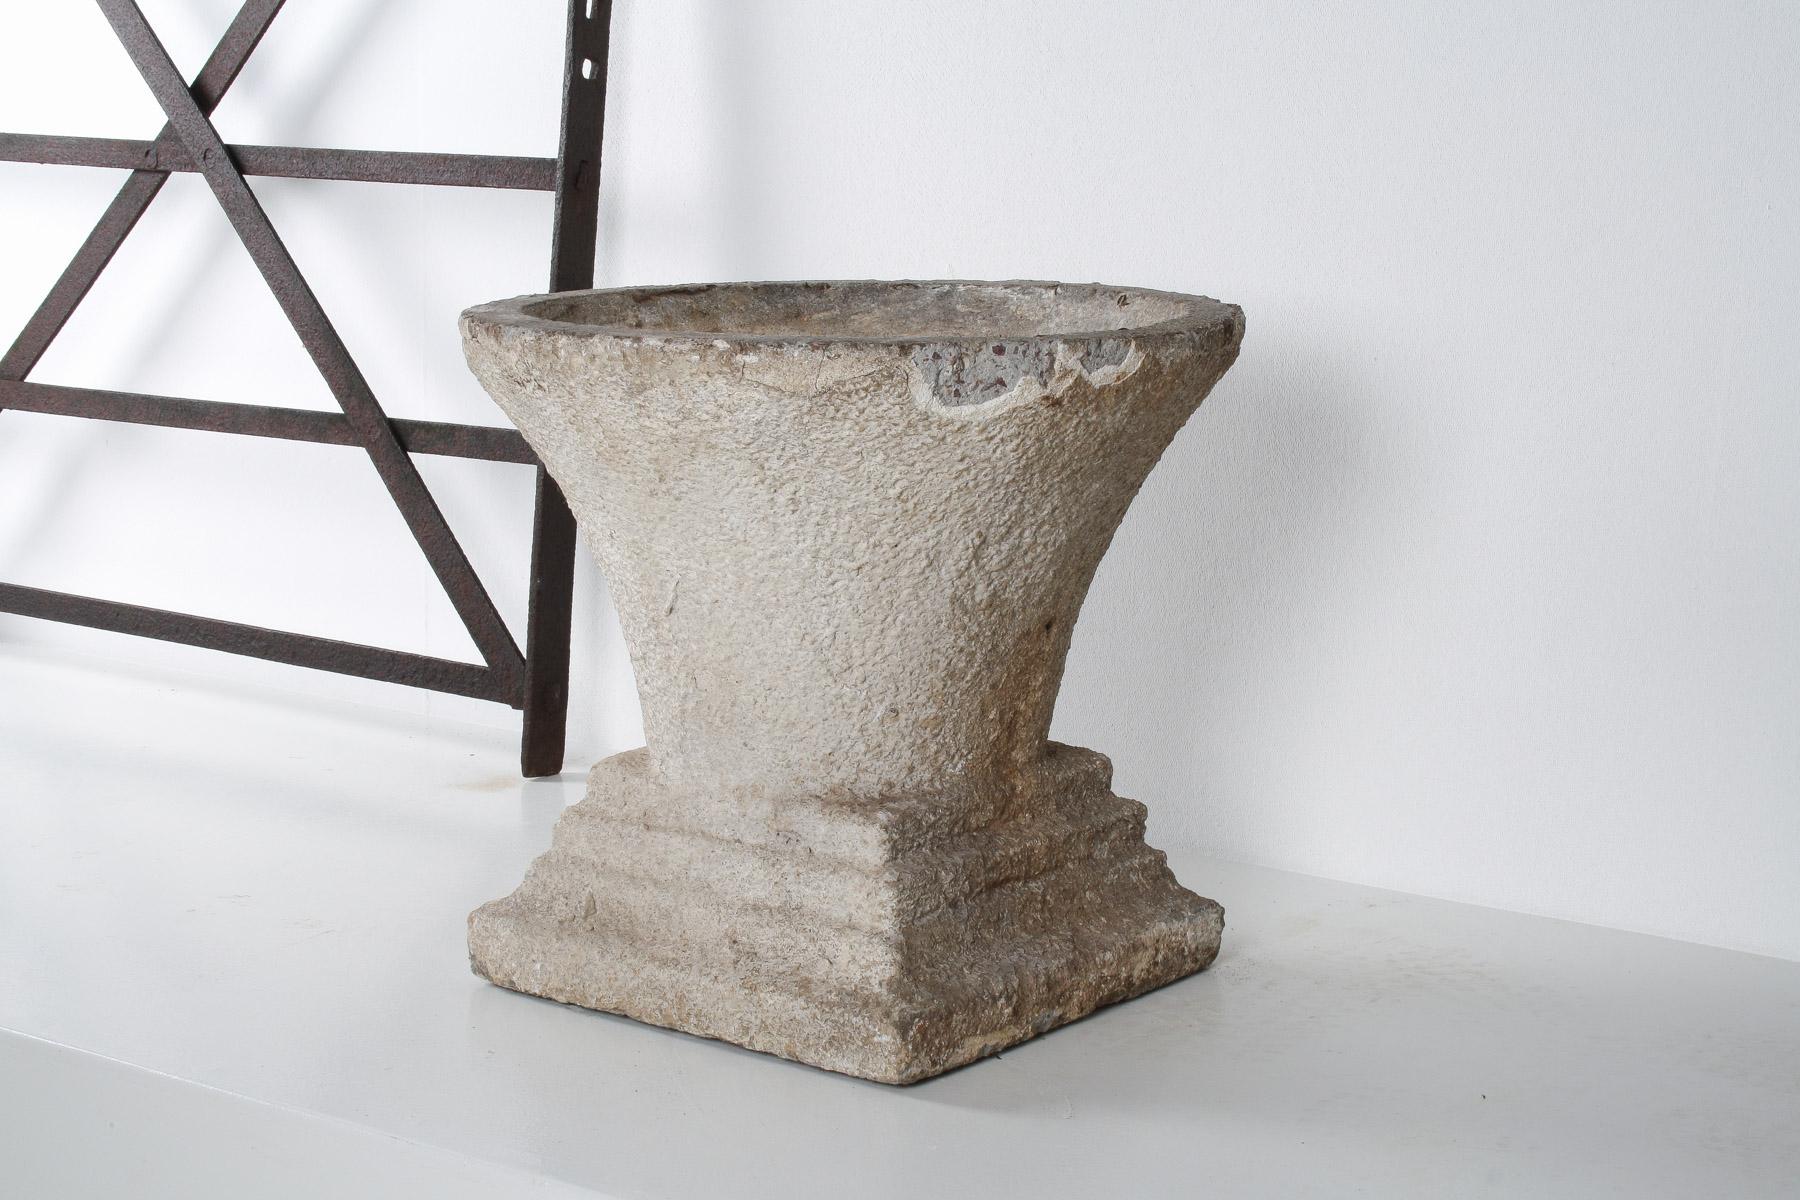 Midcentury Brutalist Cast Concrete Garden House Planter with Weathered Patina For Sale 9